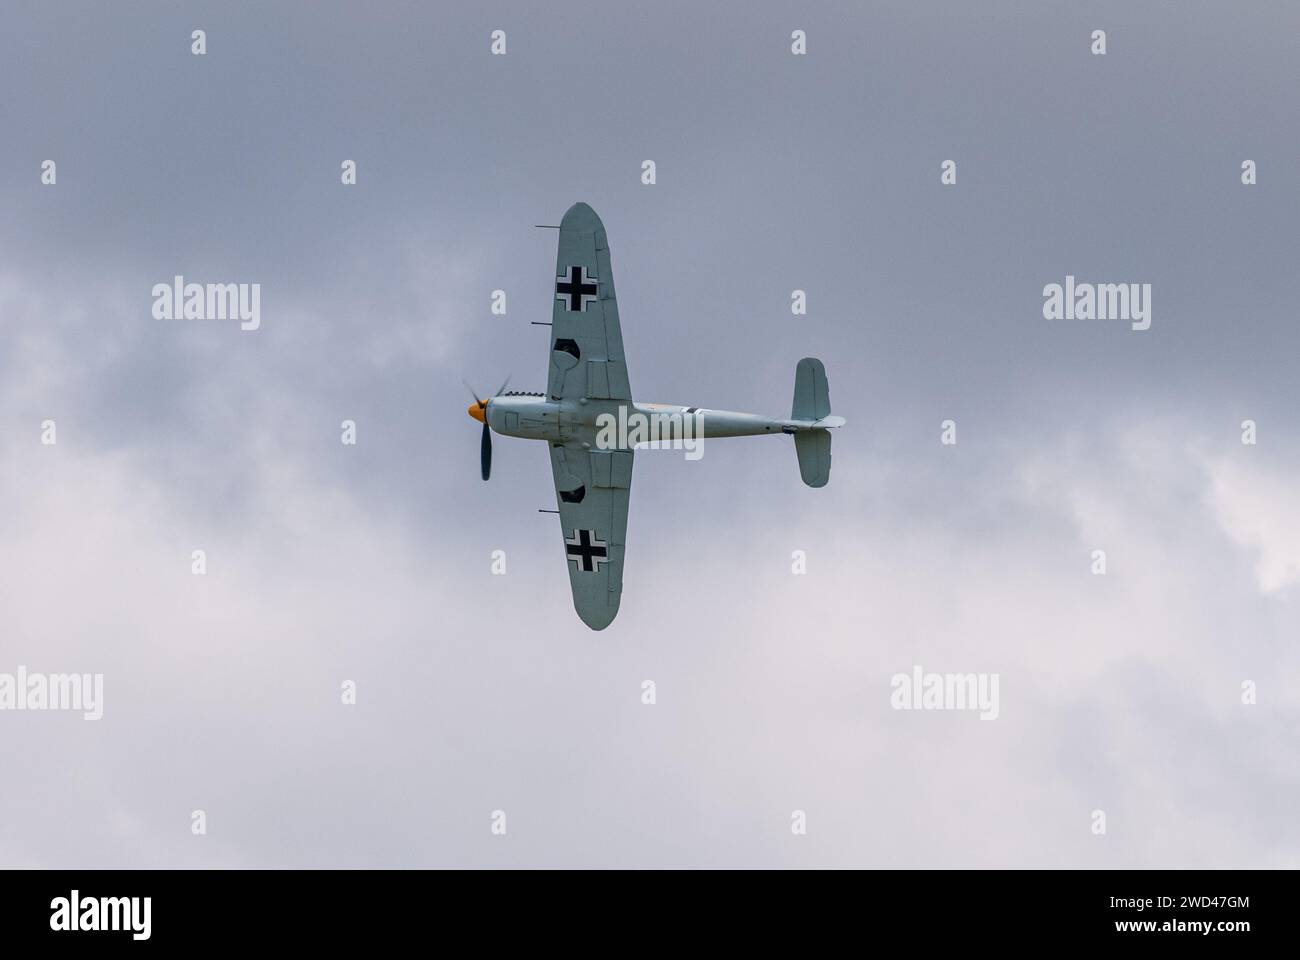 Messerschmitt Bf 109 with Hispano engine in formation flight. The well known Gerrman WW2 Fighter plane ME109 Stock Photo